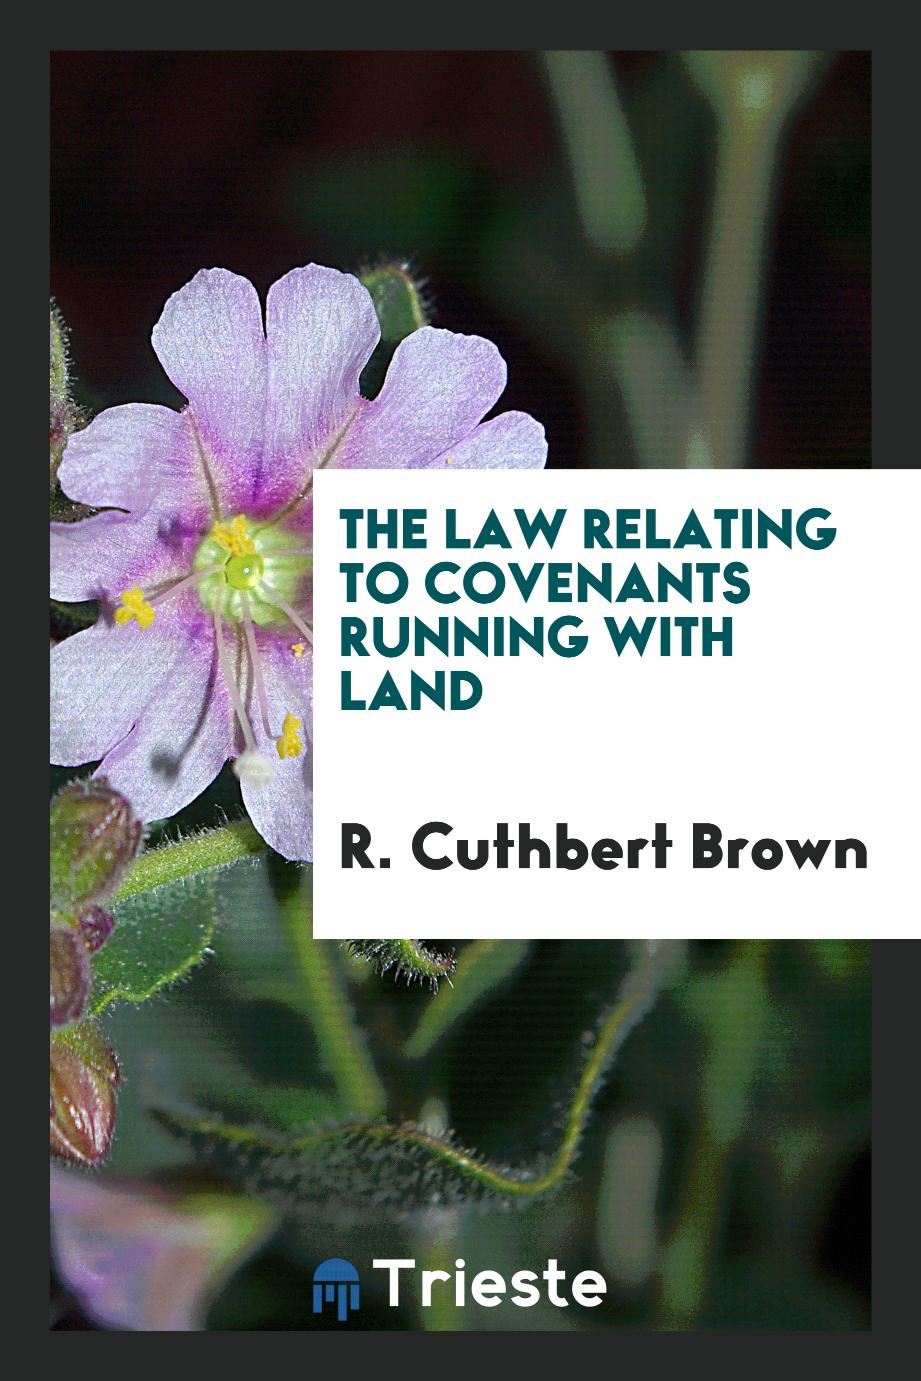 The Law Relating to Covenants Running with Land